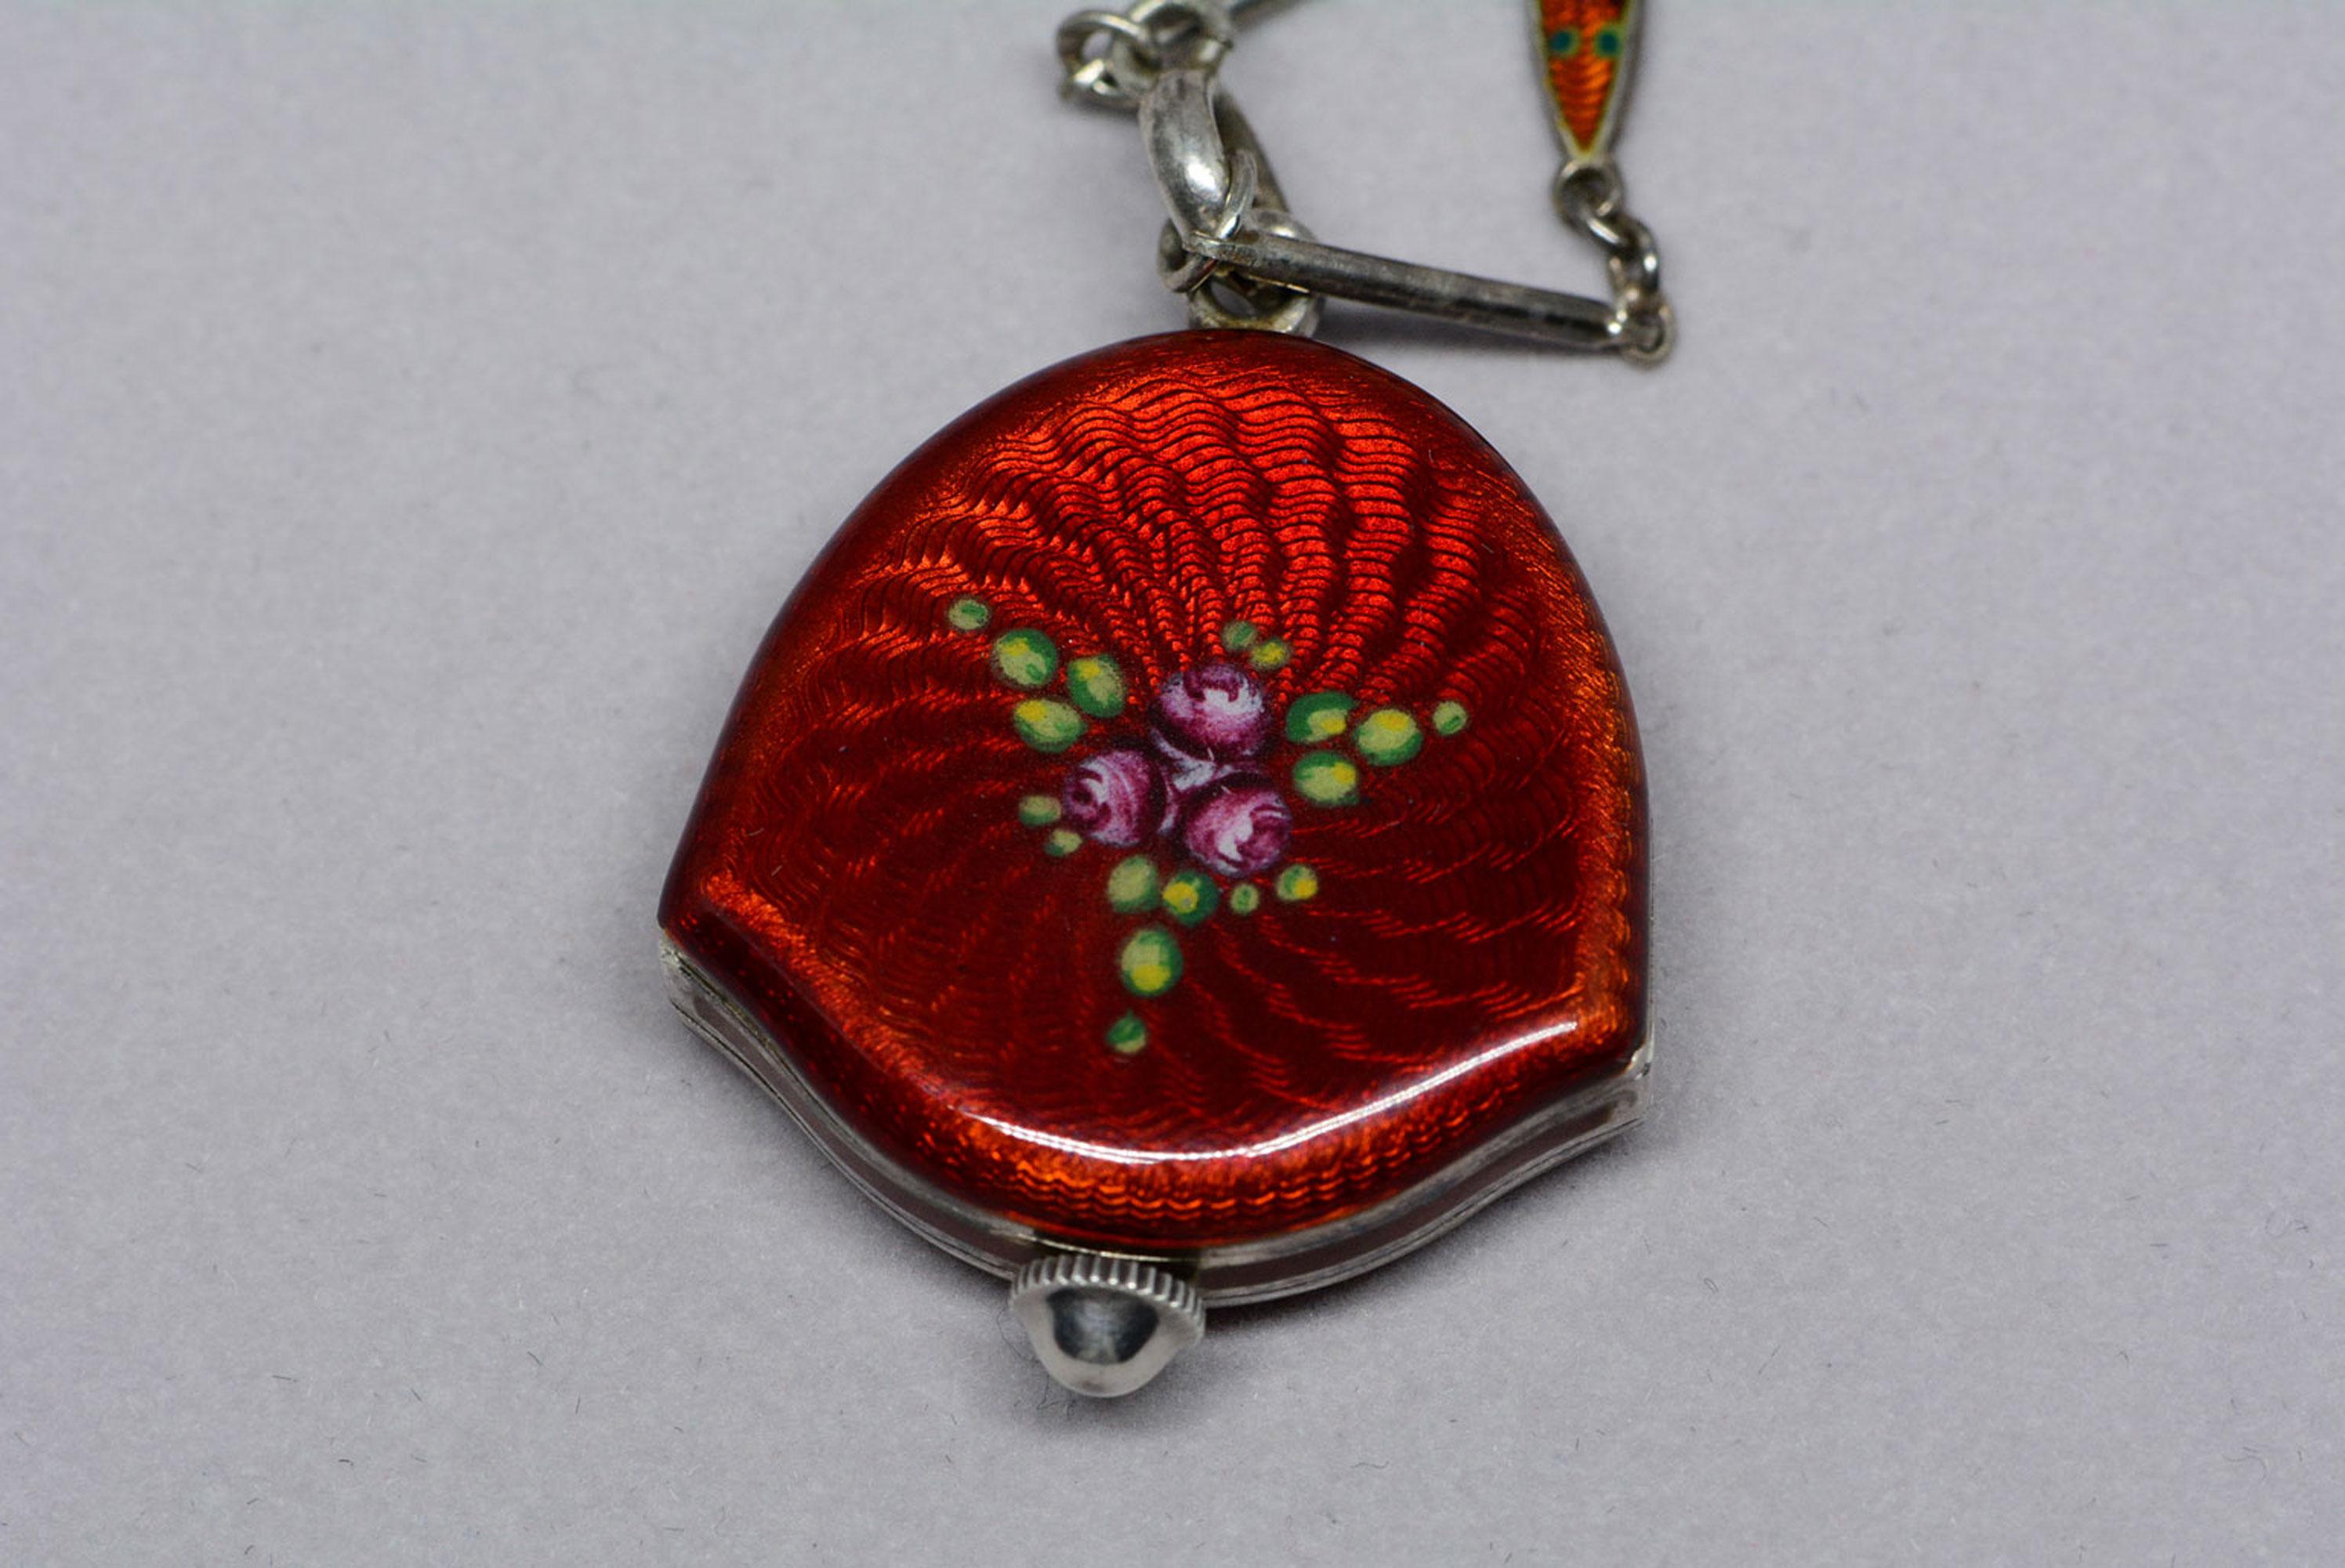 This Bucherer watch pendant is made from sterling silver and has lovely enamelling in a floral motif on the watch case and on the links connected to the chain.
This all would have been applied by hand and it's something you don't see nowadays due to